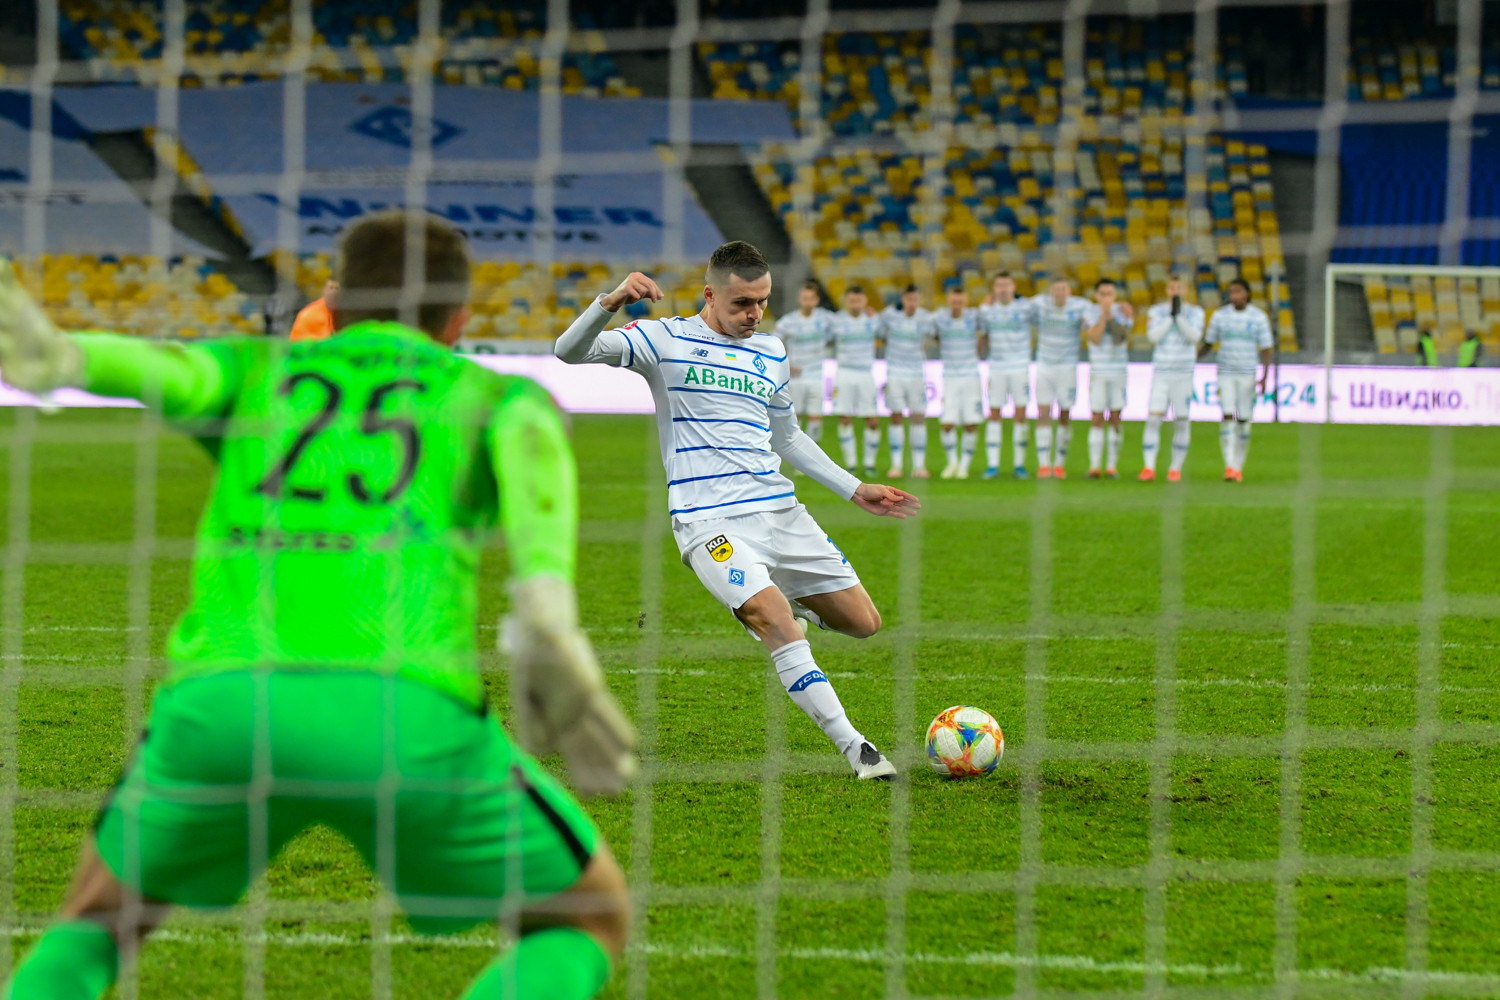 Olexandr Andriyevskyi: “This time I was calmer when taking the penalty than in the cup final”